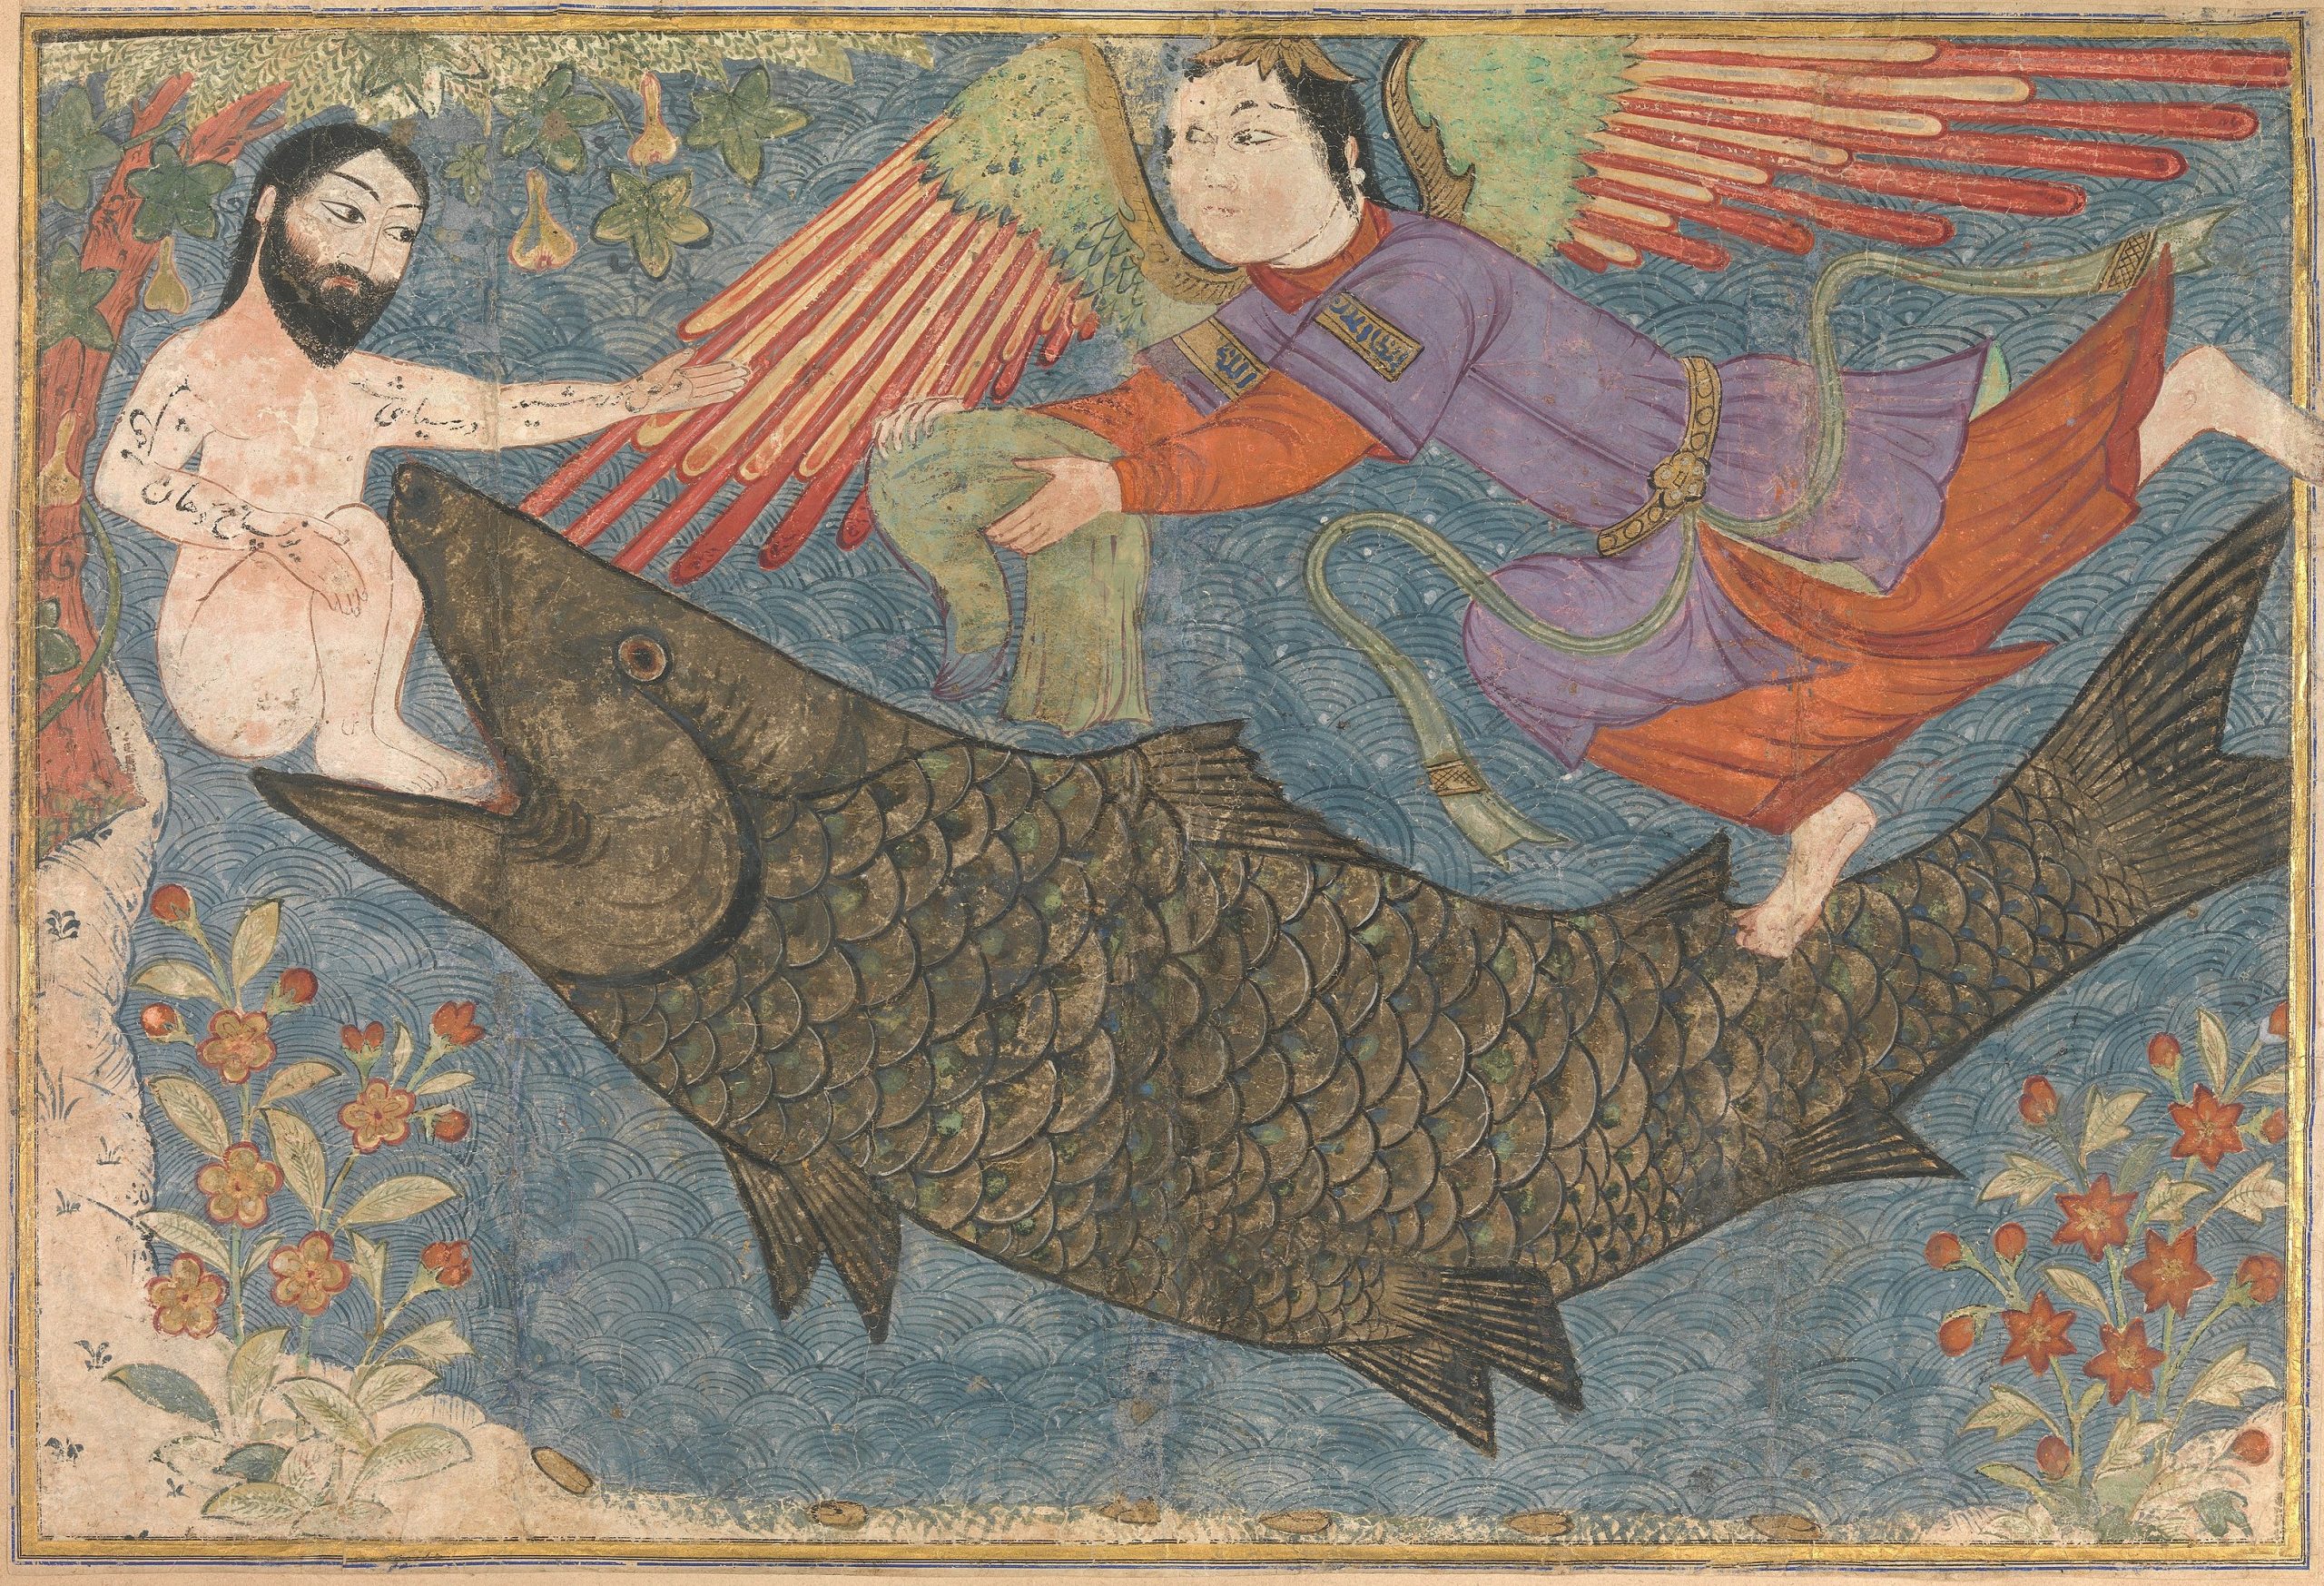 A nude man sitting at the tip of a fish's mouth while extending an arm out towards an angel with colourful wings offering him a garment